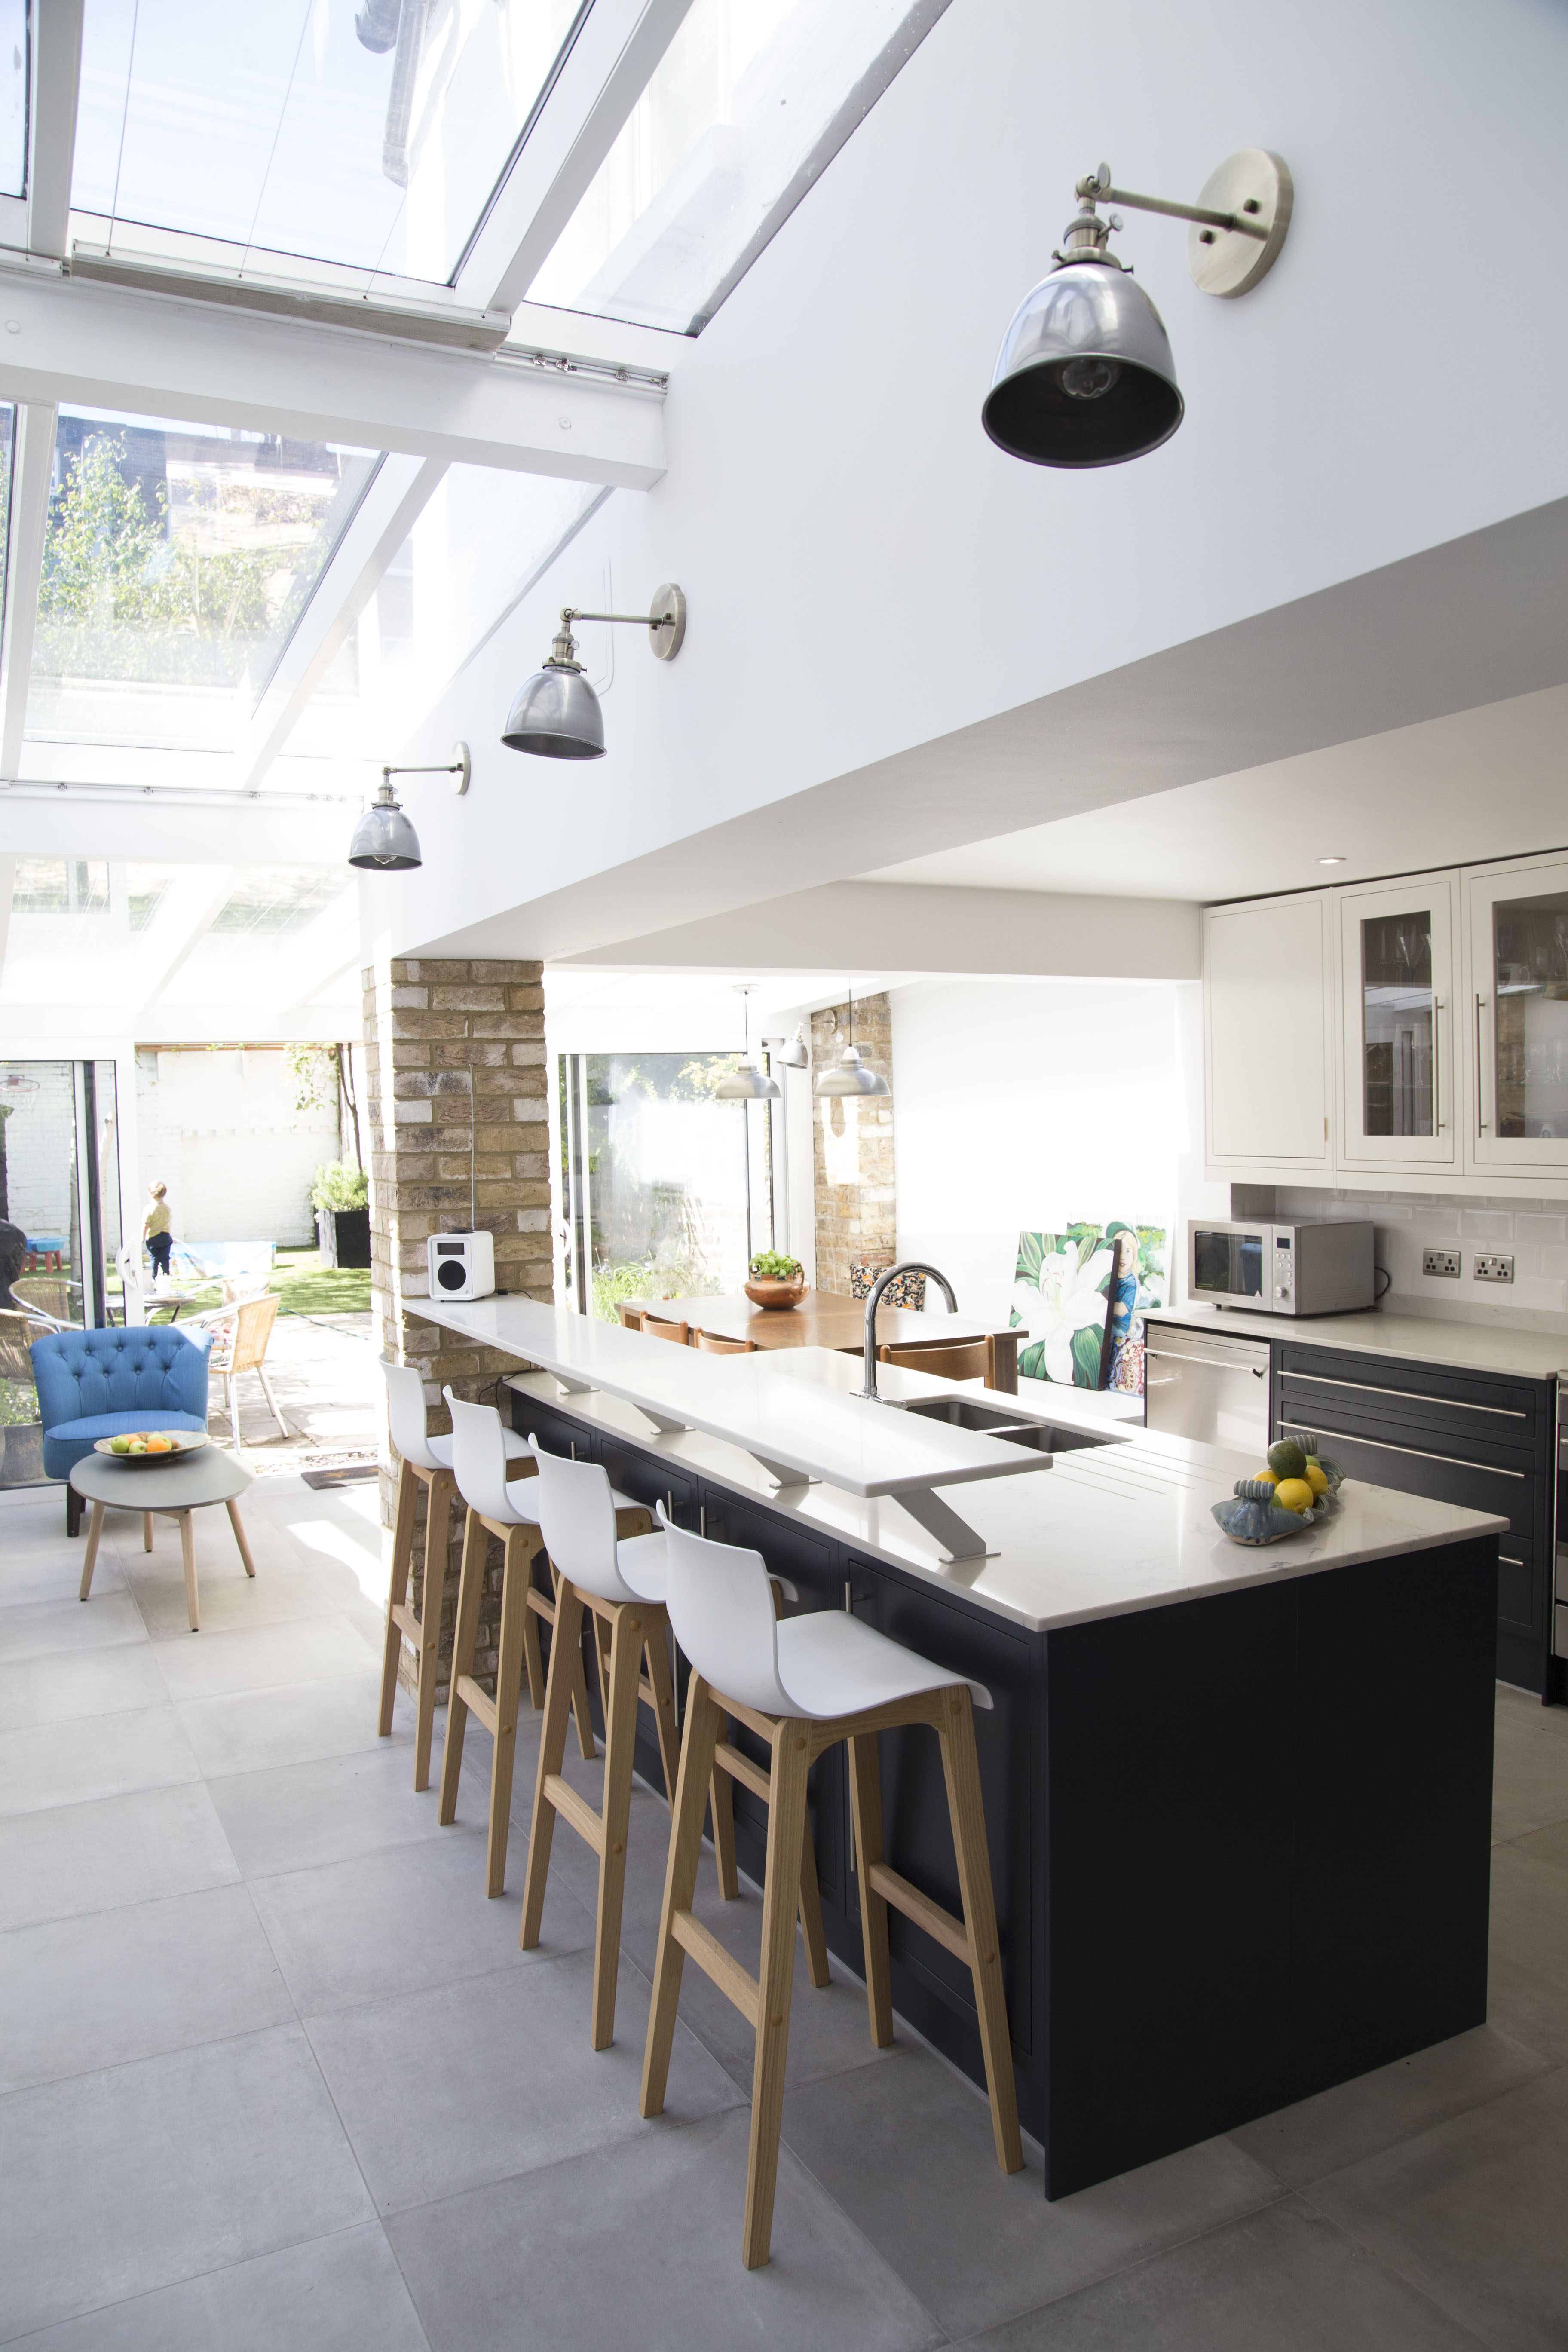 </p> <p>Find your ideal home design pro on designfor-me.com - get matched and see who's interested in your home project. Click image to see more inspiration from our design pros</p> <p>Design by Sara, architect from Hackney, London</p> <p>#architecture #homedesign #modernhomes #homeinspiration #kitchens #kitchendesign #kitcheninspiration #kitchenideas #kitchengoals #sideextensions #sidereturn #sideextensionideas #skylights #rooflights </p> <p>